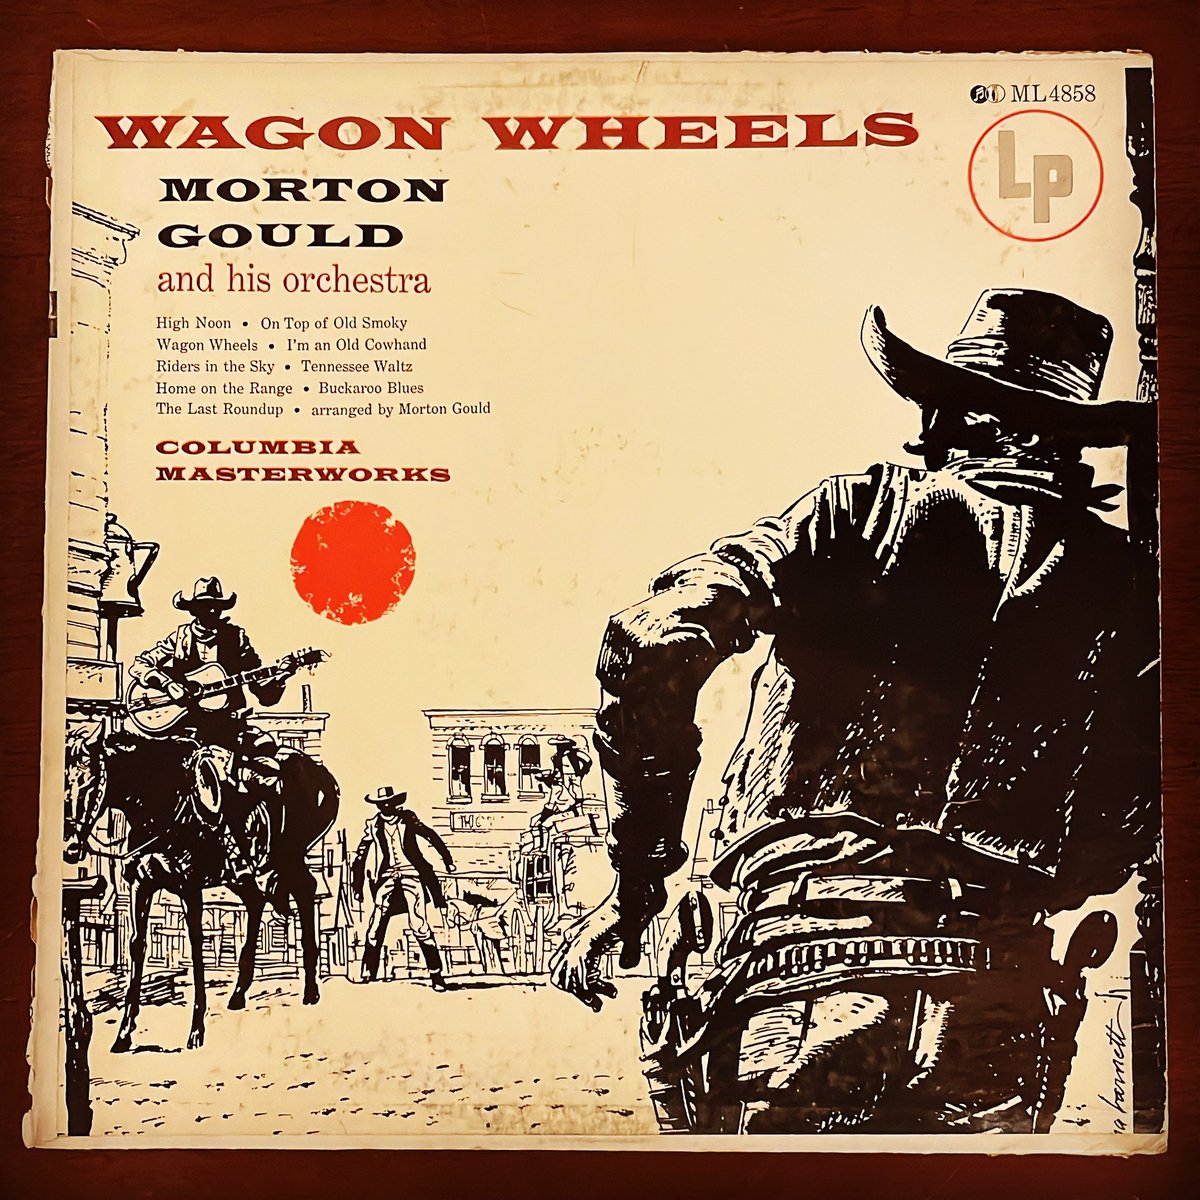 Listenin’ to this gem I picked at a thrift store! 🎶🤠🎶
.
.
.

#cmacrecordcollection #record #vinyl #vinyligclub #vinylcommunity #vinylcollection #vinylcollectionpost #recordcollection #recordcollector #collection #retro #wagonwheels #mortongould #western